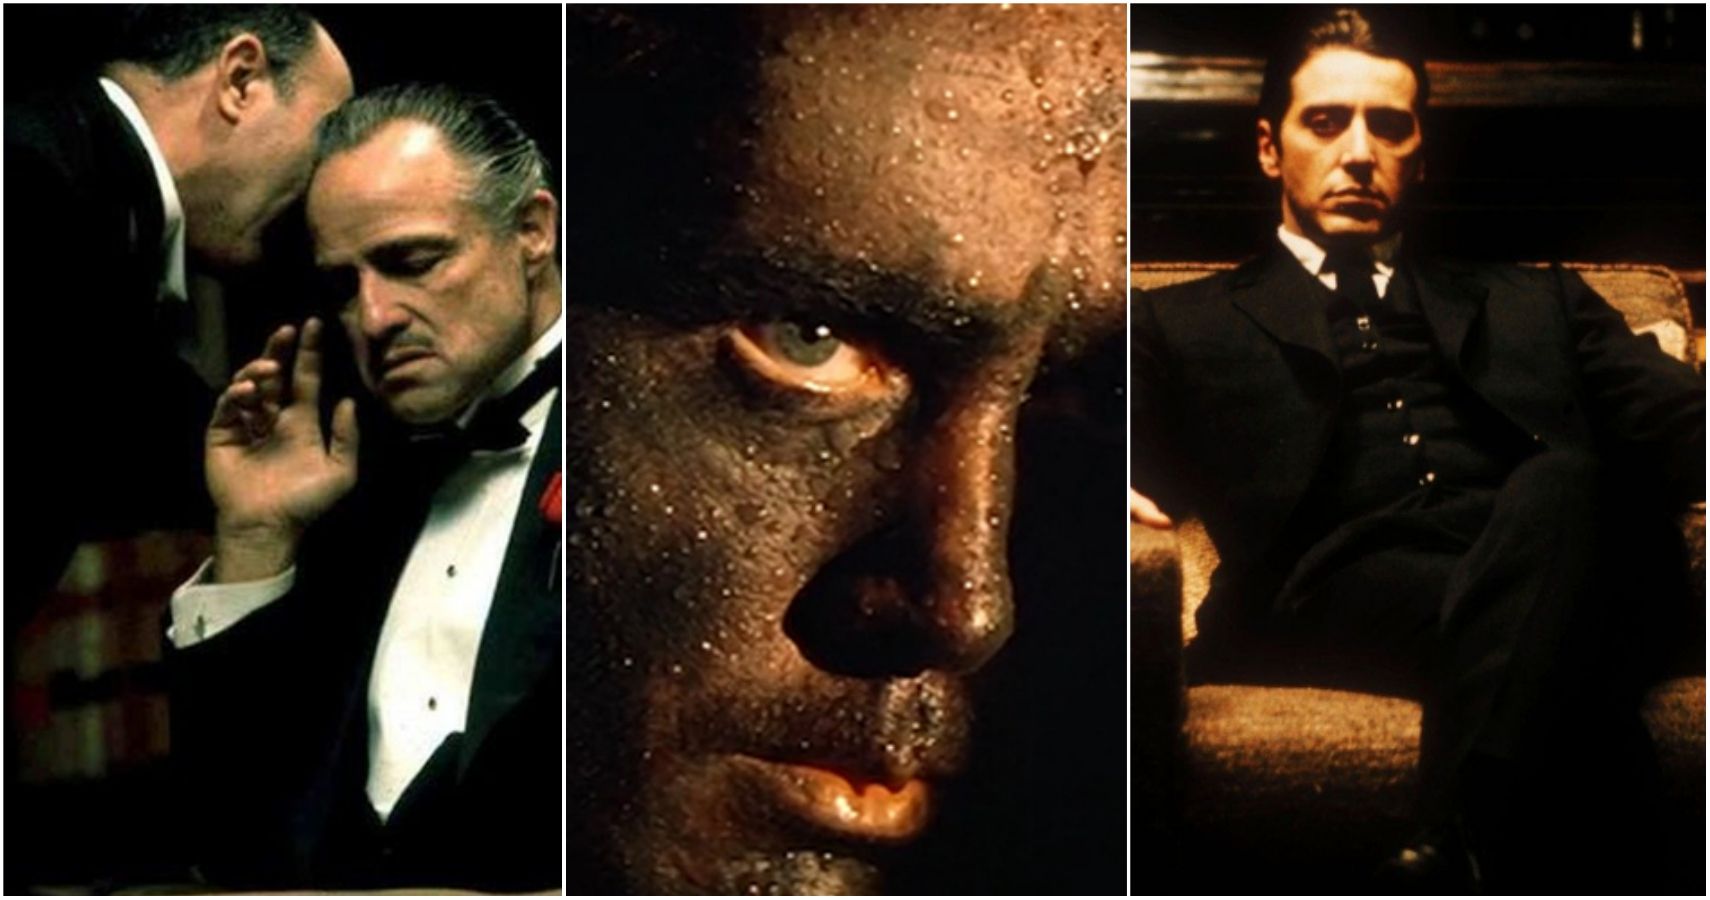 Francis Ford Coppola 10 Best Movies (According To Rotten Tomatoes)